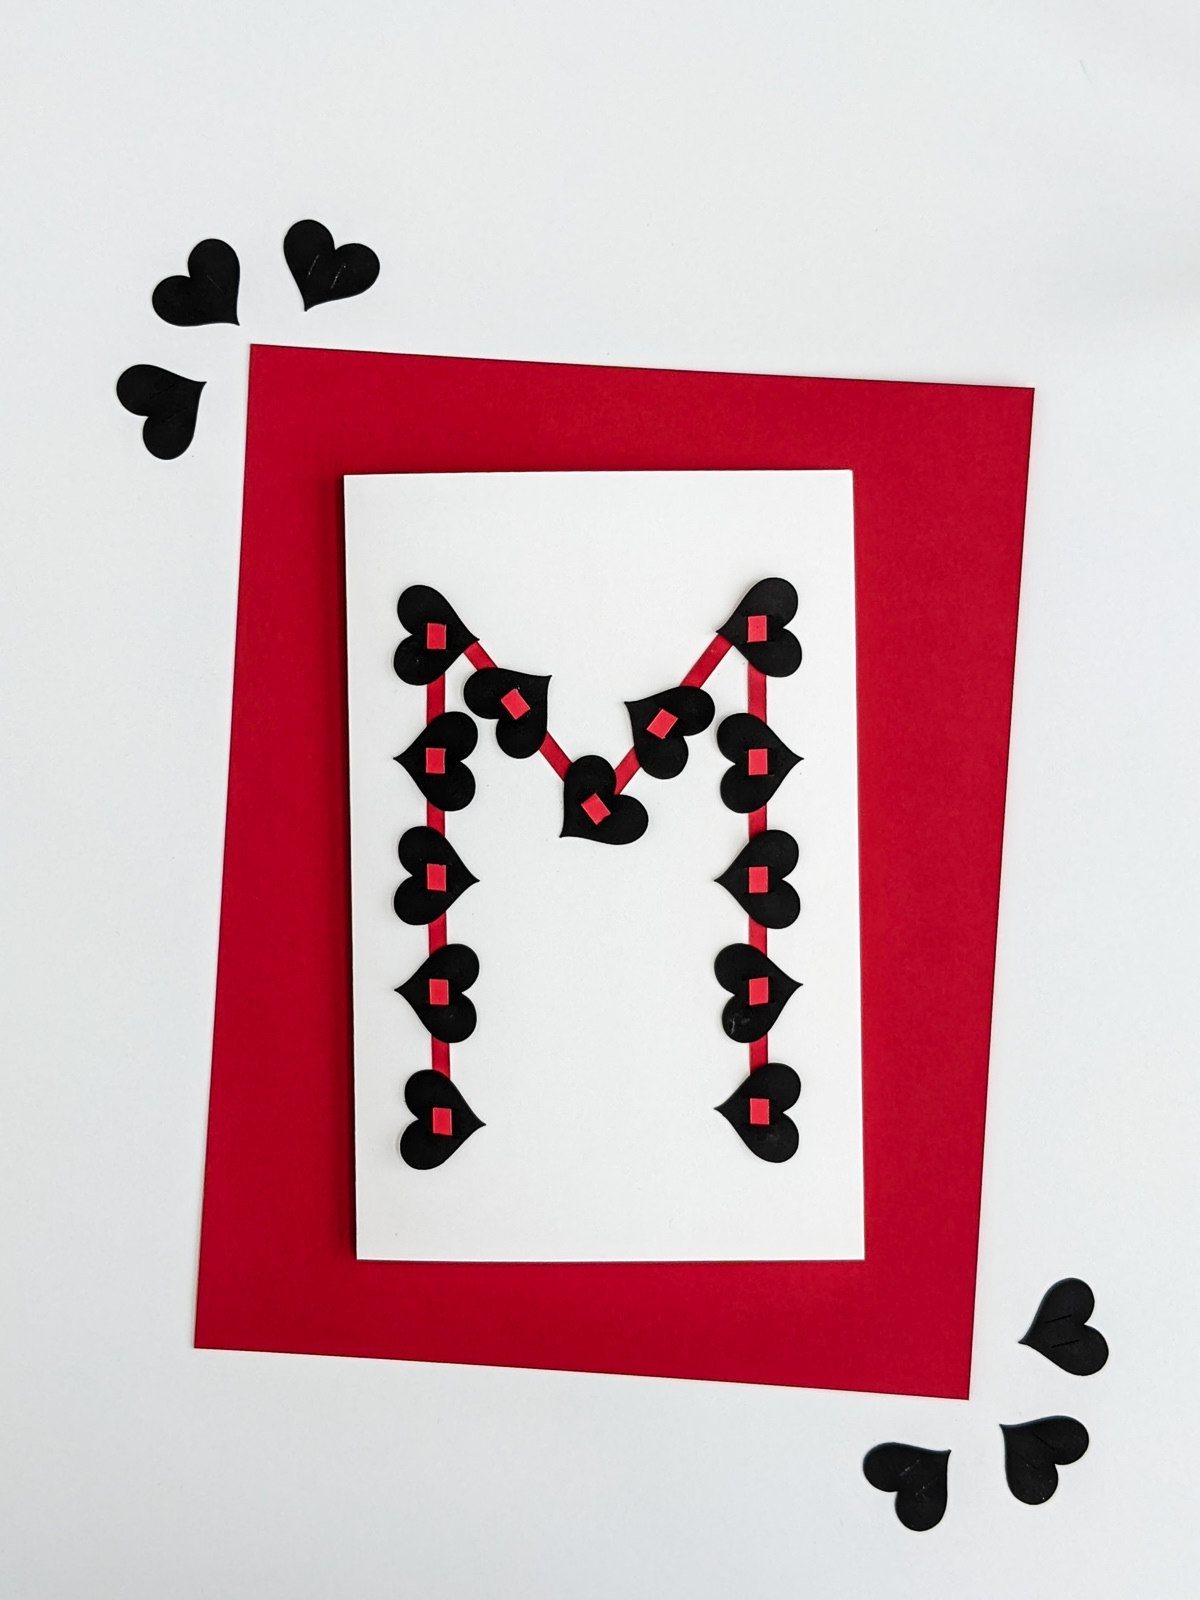 Handmade valentine for teens with black hearts and red strips of their first initial